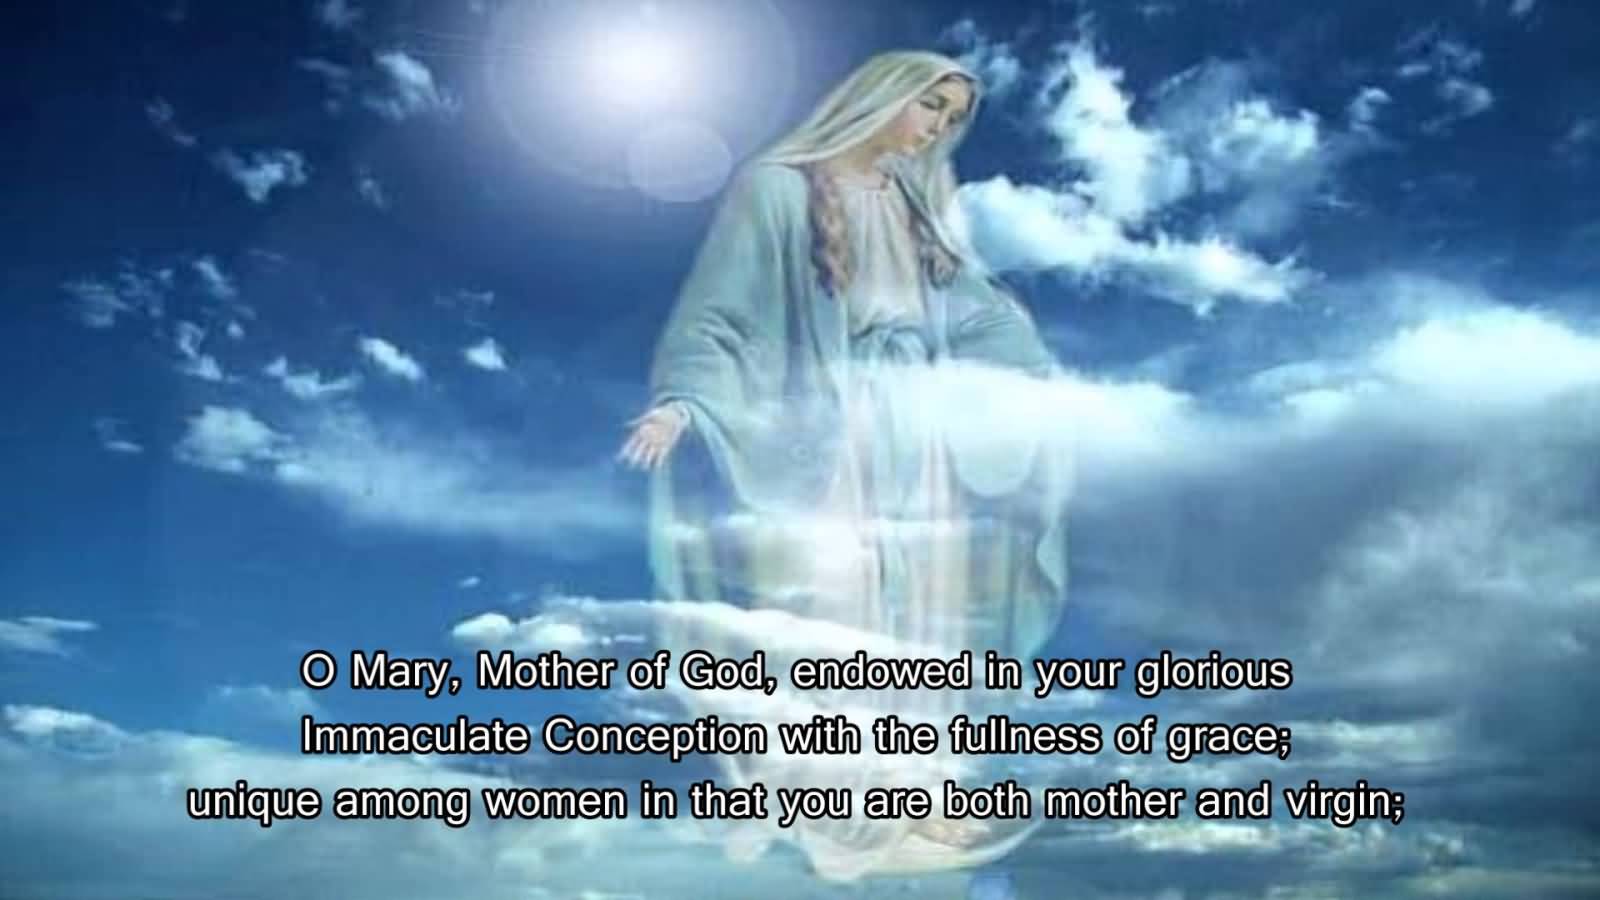 O Mary, Mother Of God, Endowed In Your Glorious Immaculate Conception With The Fullness Of Grace